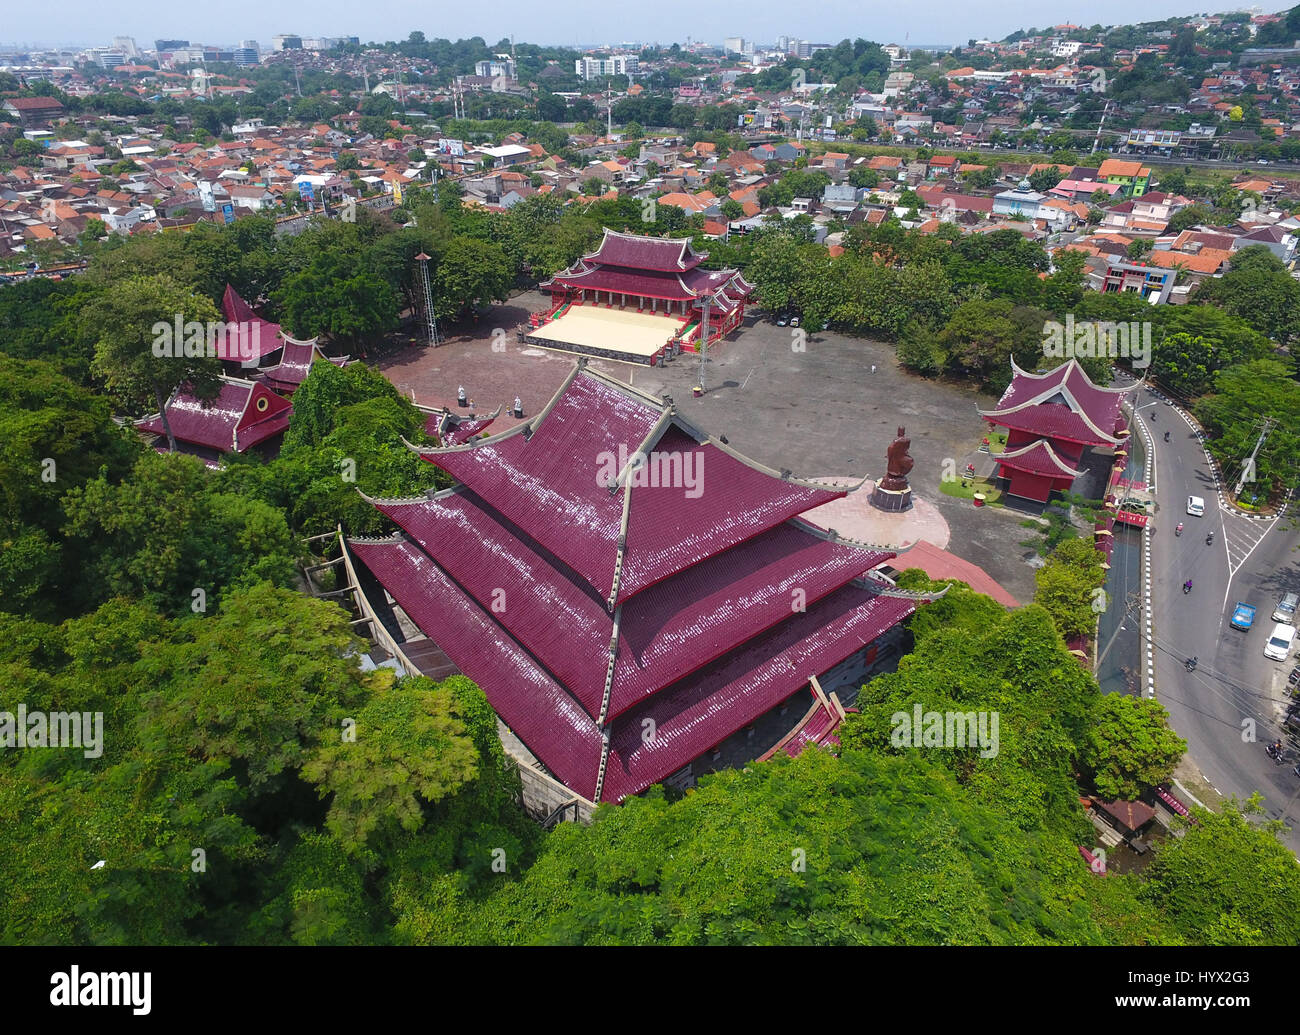 (170407) -- SEMARANG(INDONESIA), April 7, 2017 (Xinhua) -- Photo taken on April 4, 2017 shows the Sam Poo Kong Temple, which was built in memory of the Chinese Ming Dynasty (1368-1644) navigator Zheng He's arrival at Semarang, in Semarang, Indonesia. Chinese navy explorer Zheng He who visited the Central Java Province's port city of Semarang 600 years ago has an enduring legacy in the capital of the province. Arriving here at the beginning of the 15th century, Zheng He made a cave on the Simongan Hill as his temporary abode and repaired his ships. During his stay, Zheng He built a mosque and s Stock Photo